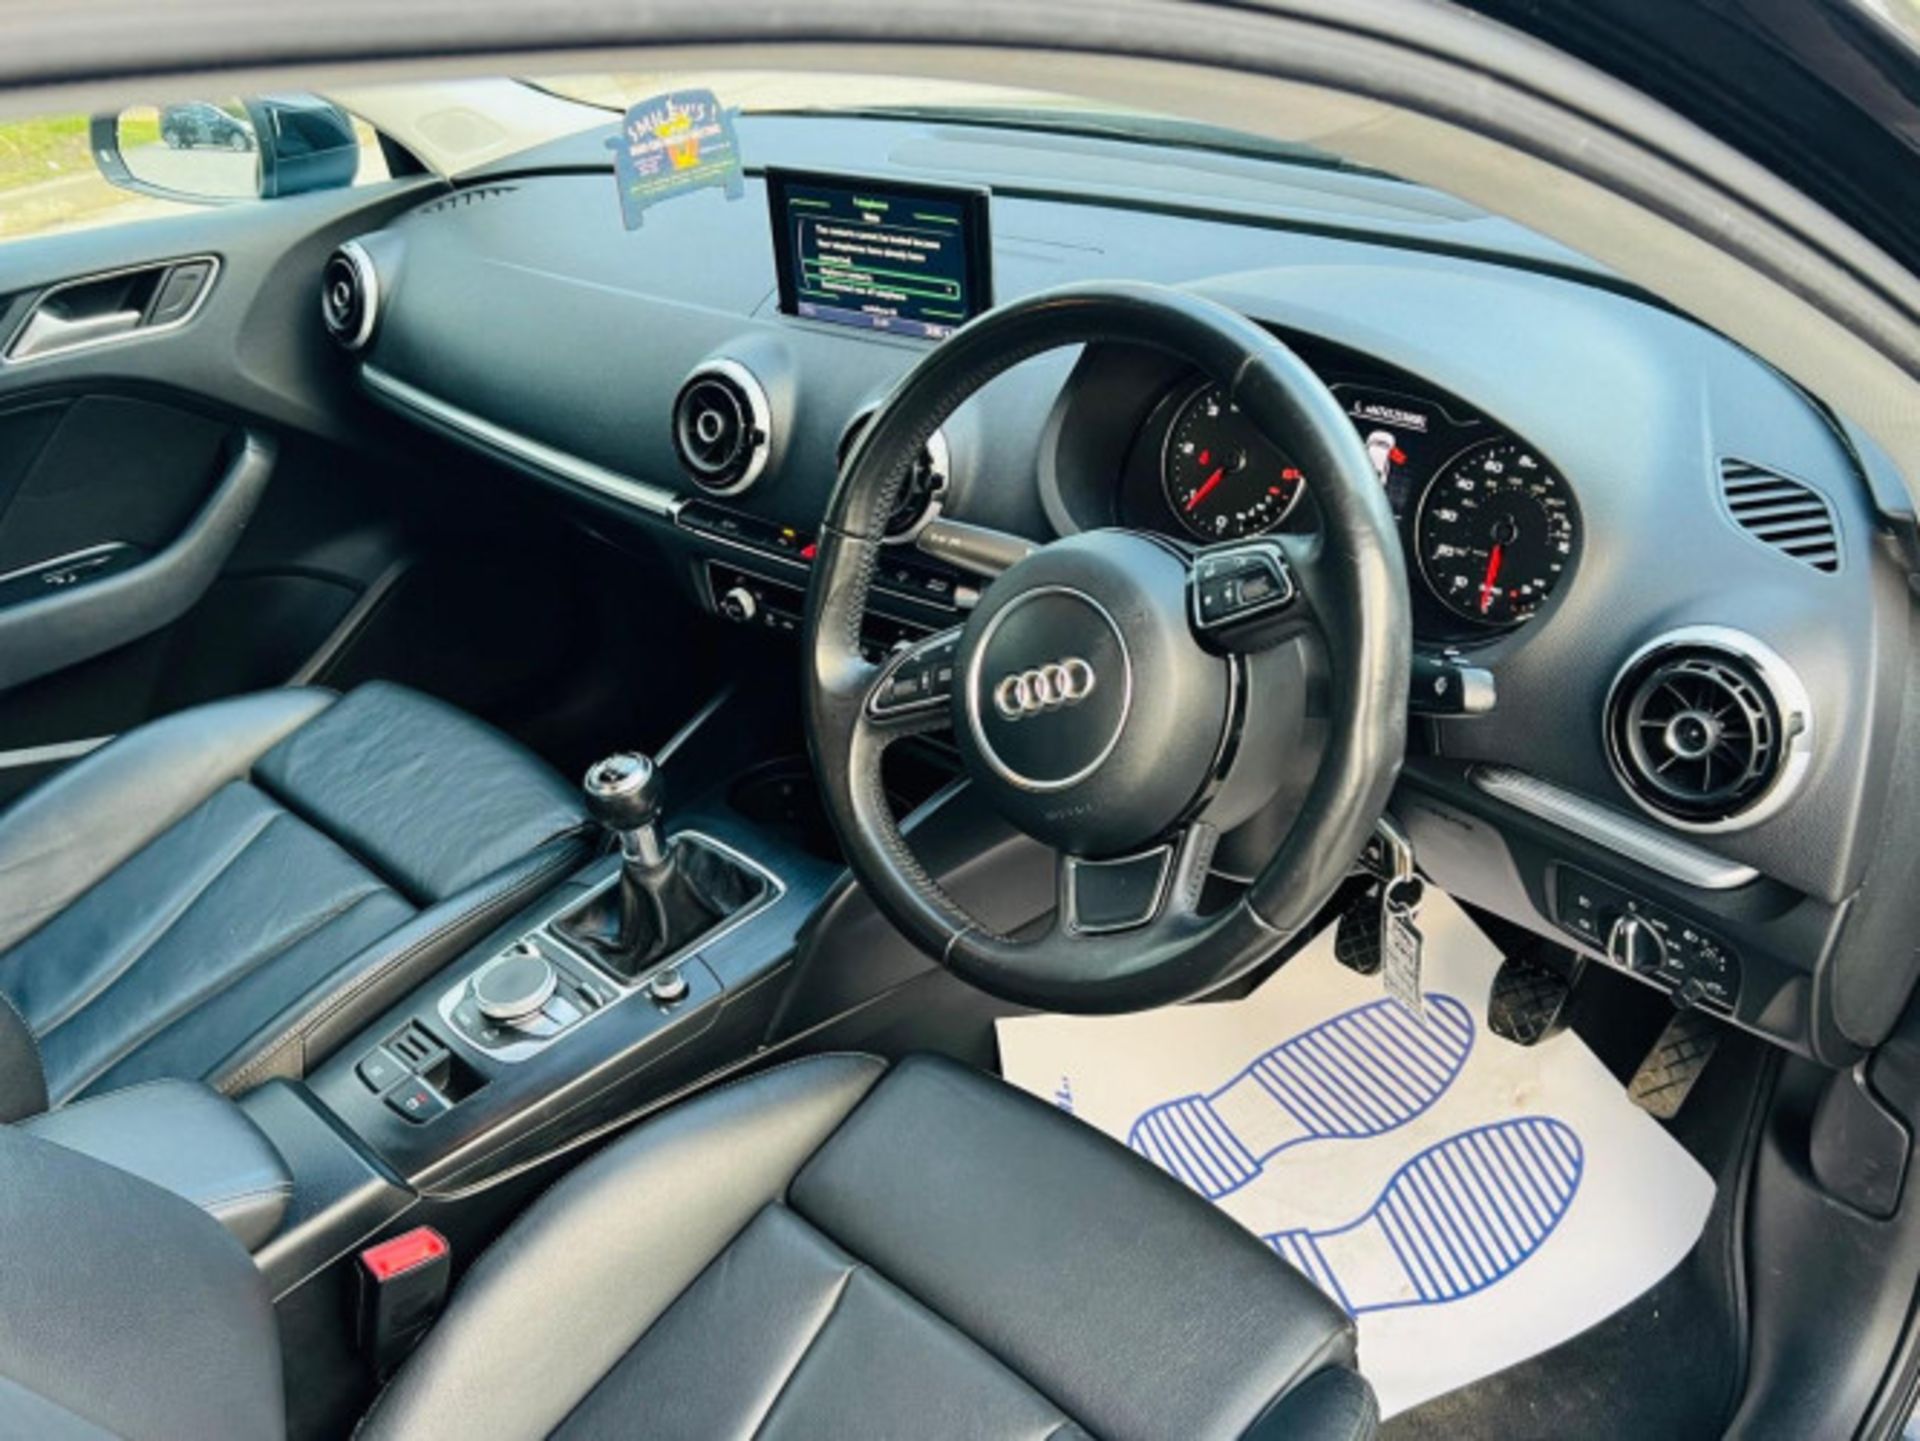 AUDI A3 2.0TDI SPORTBACK - STYLE, PERFORMANCE, AND COMFORT COMBINED >>--NO VAT ON HAMMER--<< - Image 147 of 216